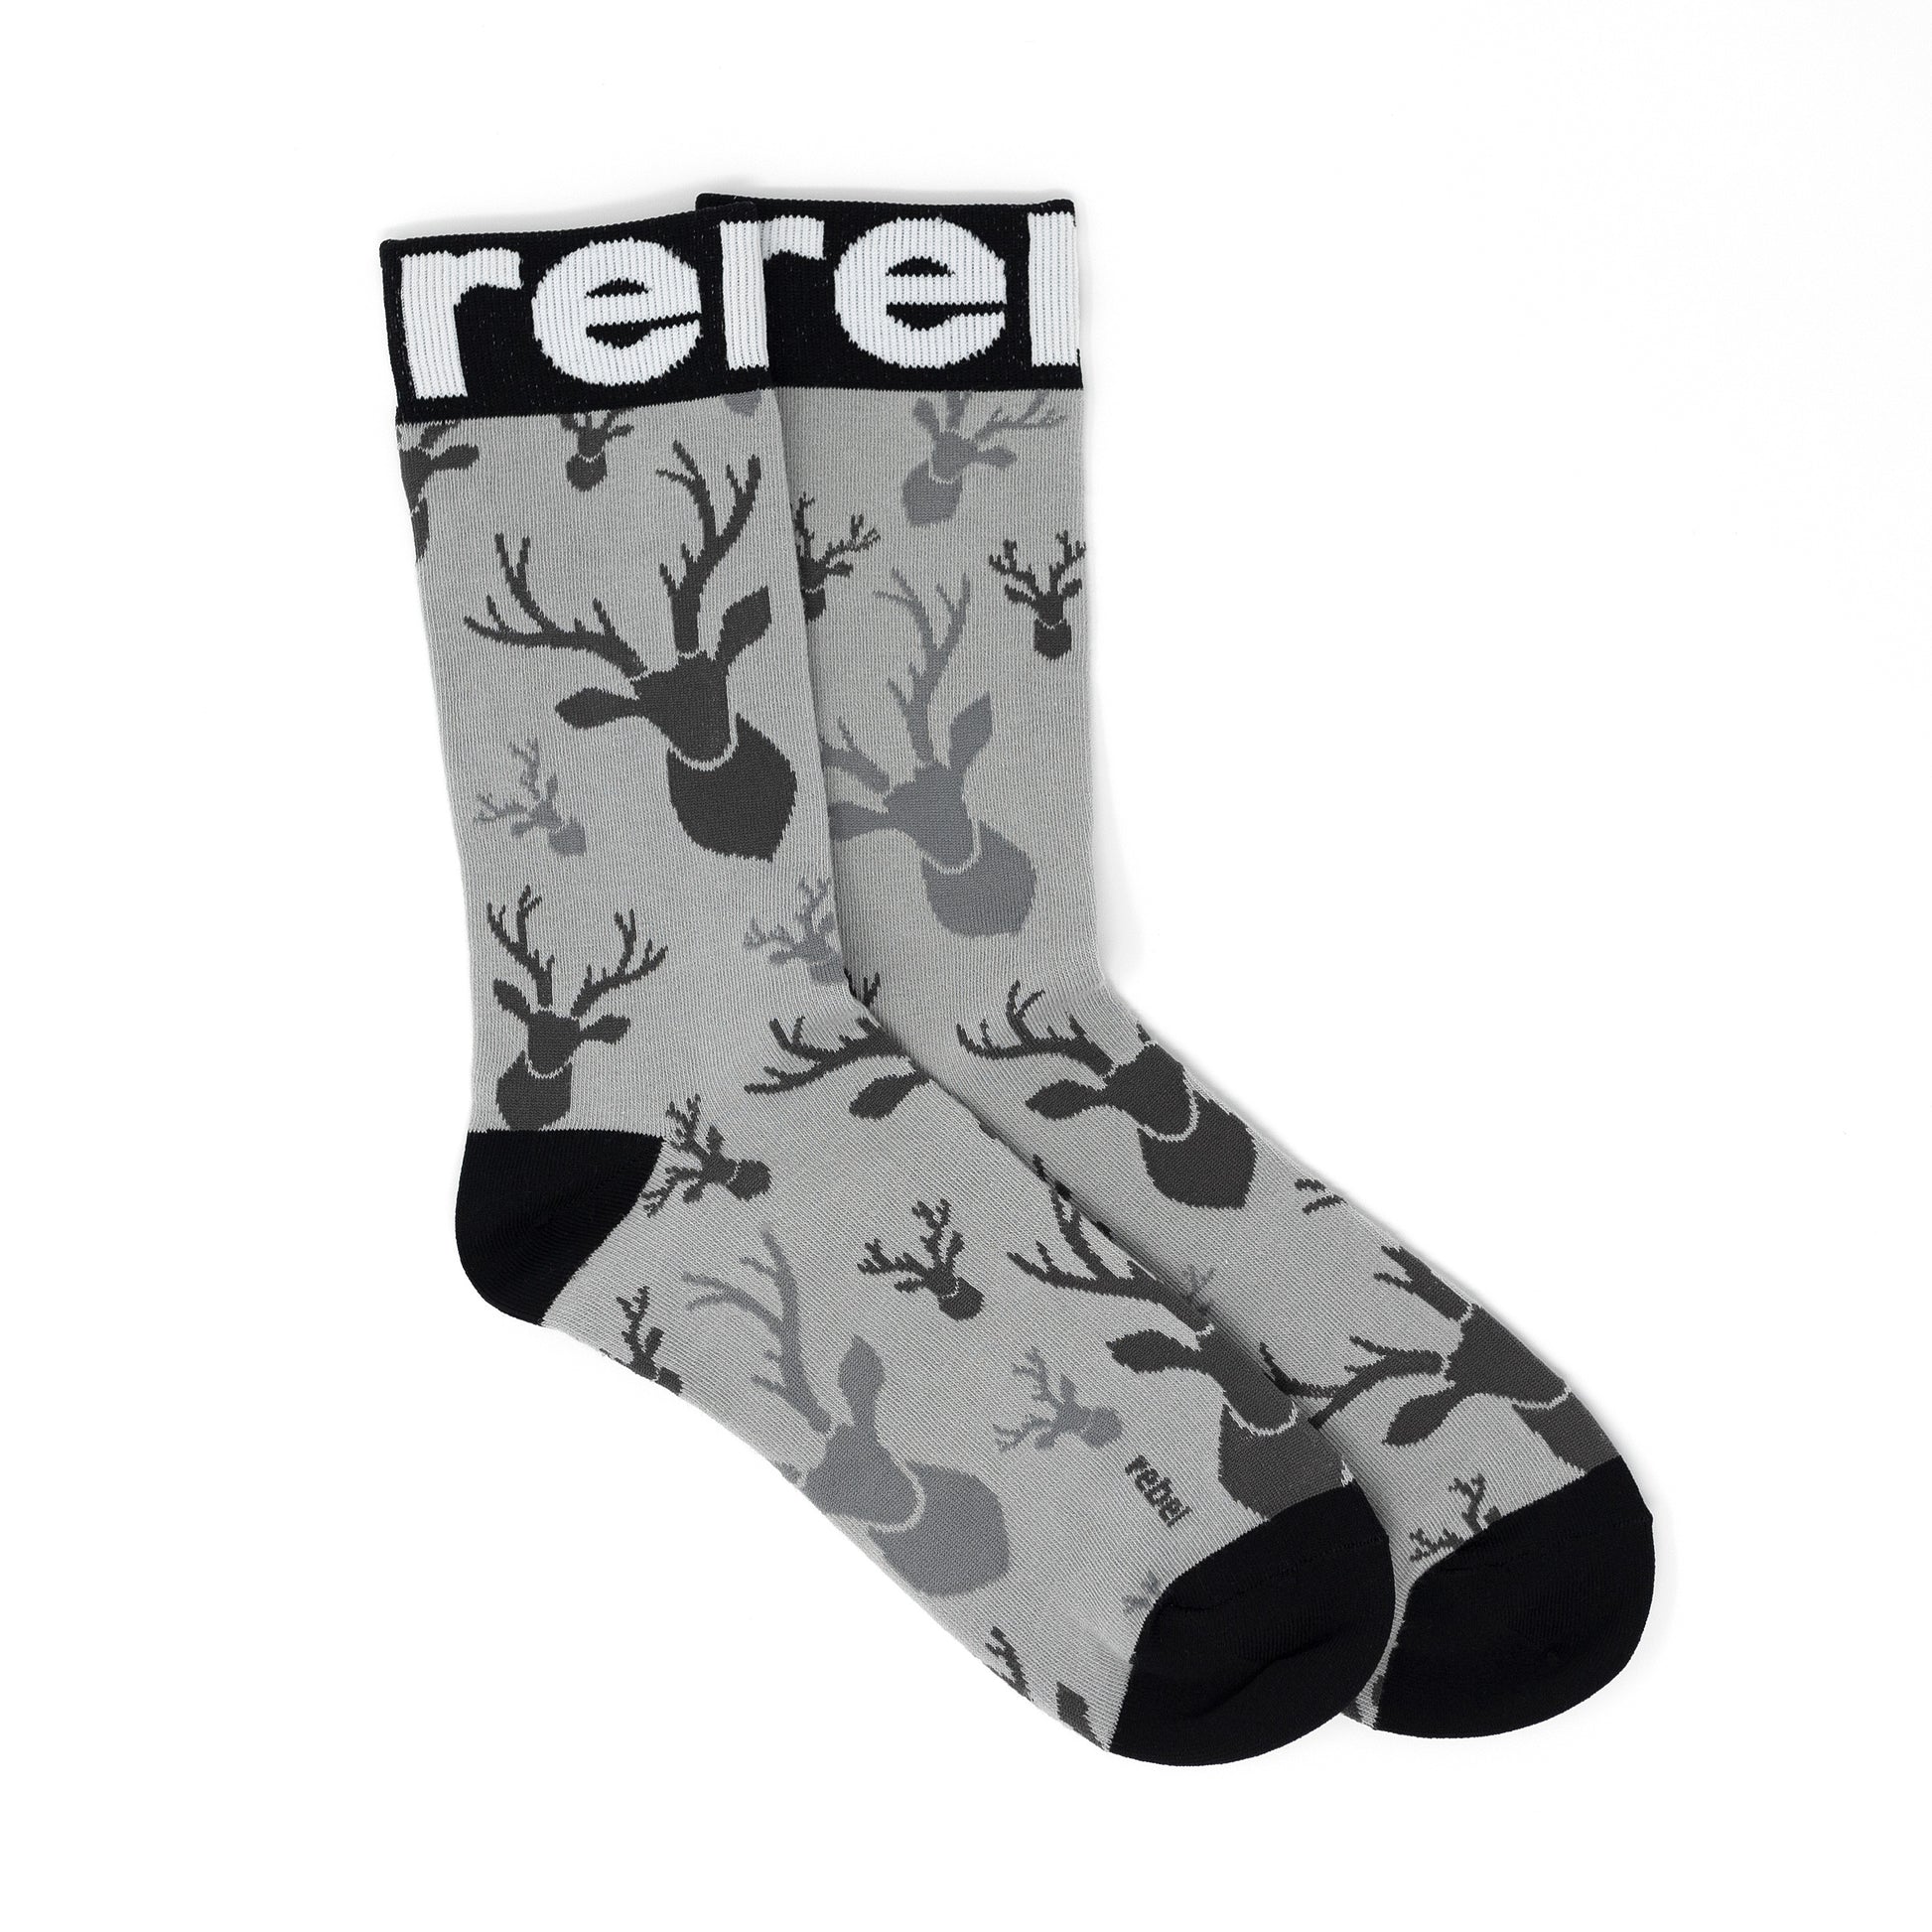 Our Funky Deer Socks are perfect for anyone who wants to add a touch of fun to their outfit.